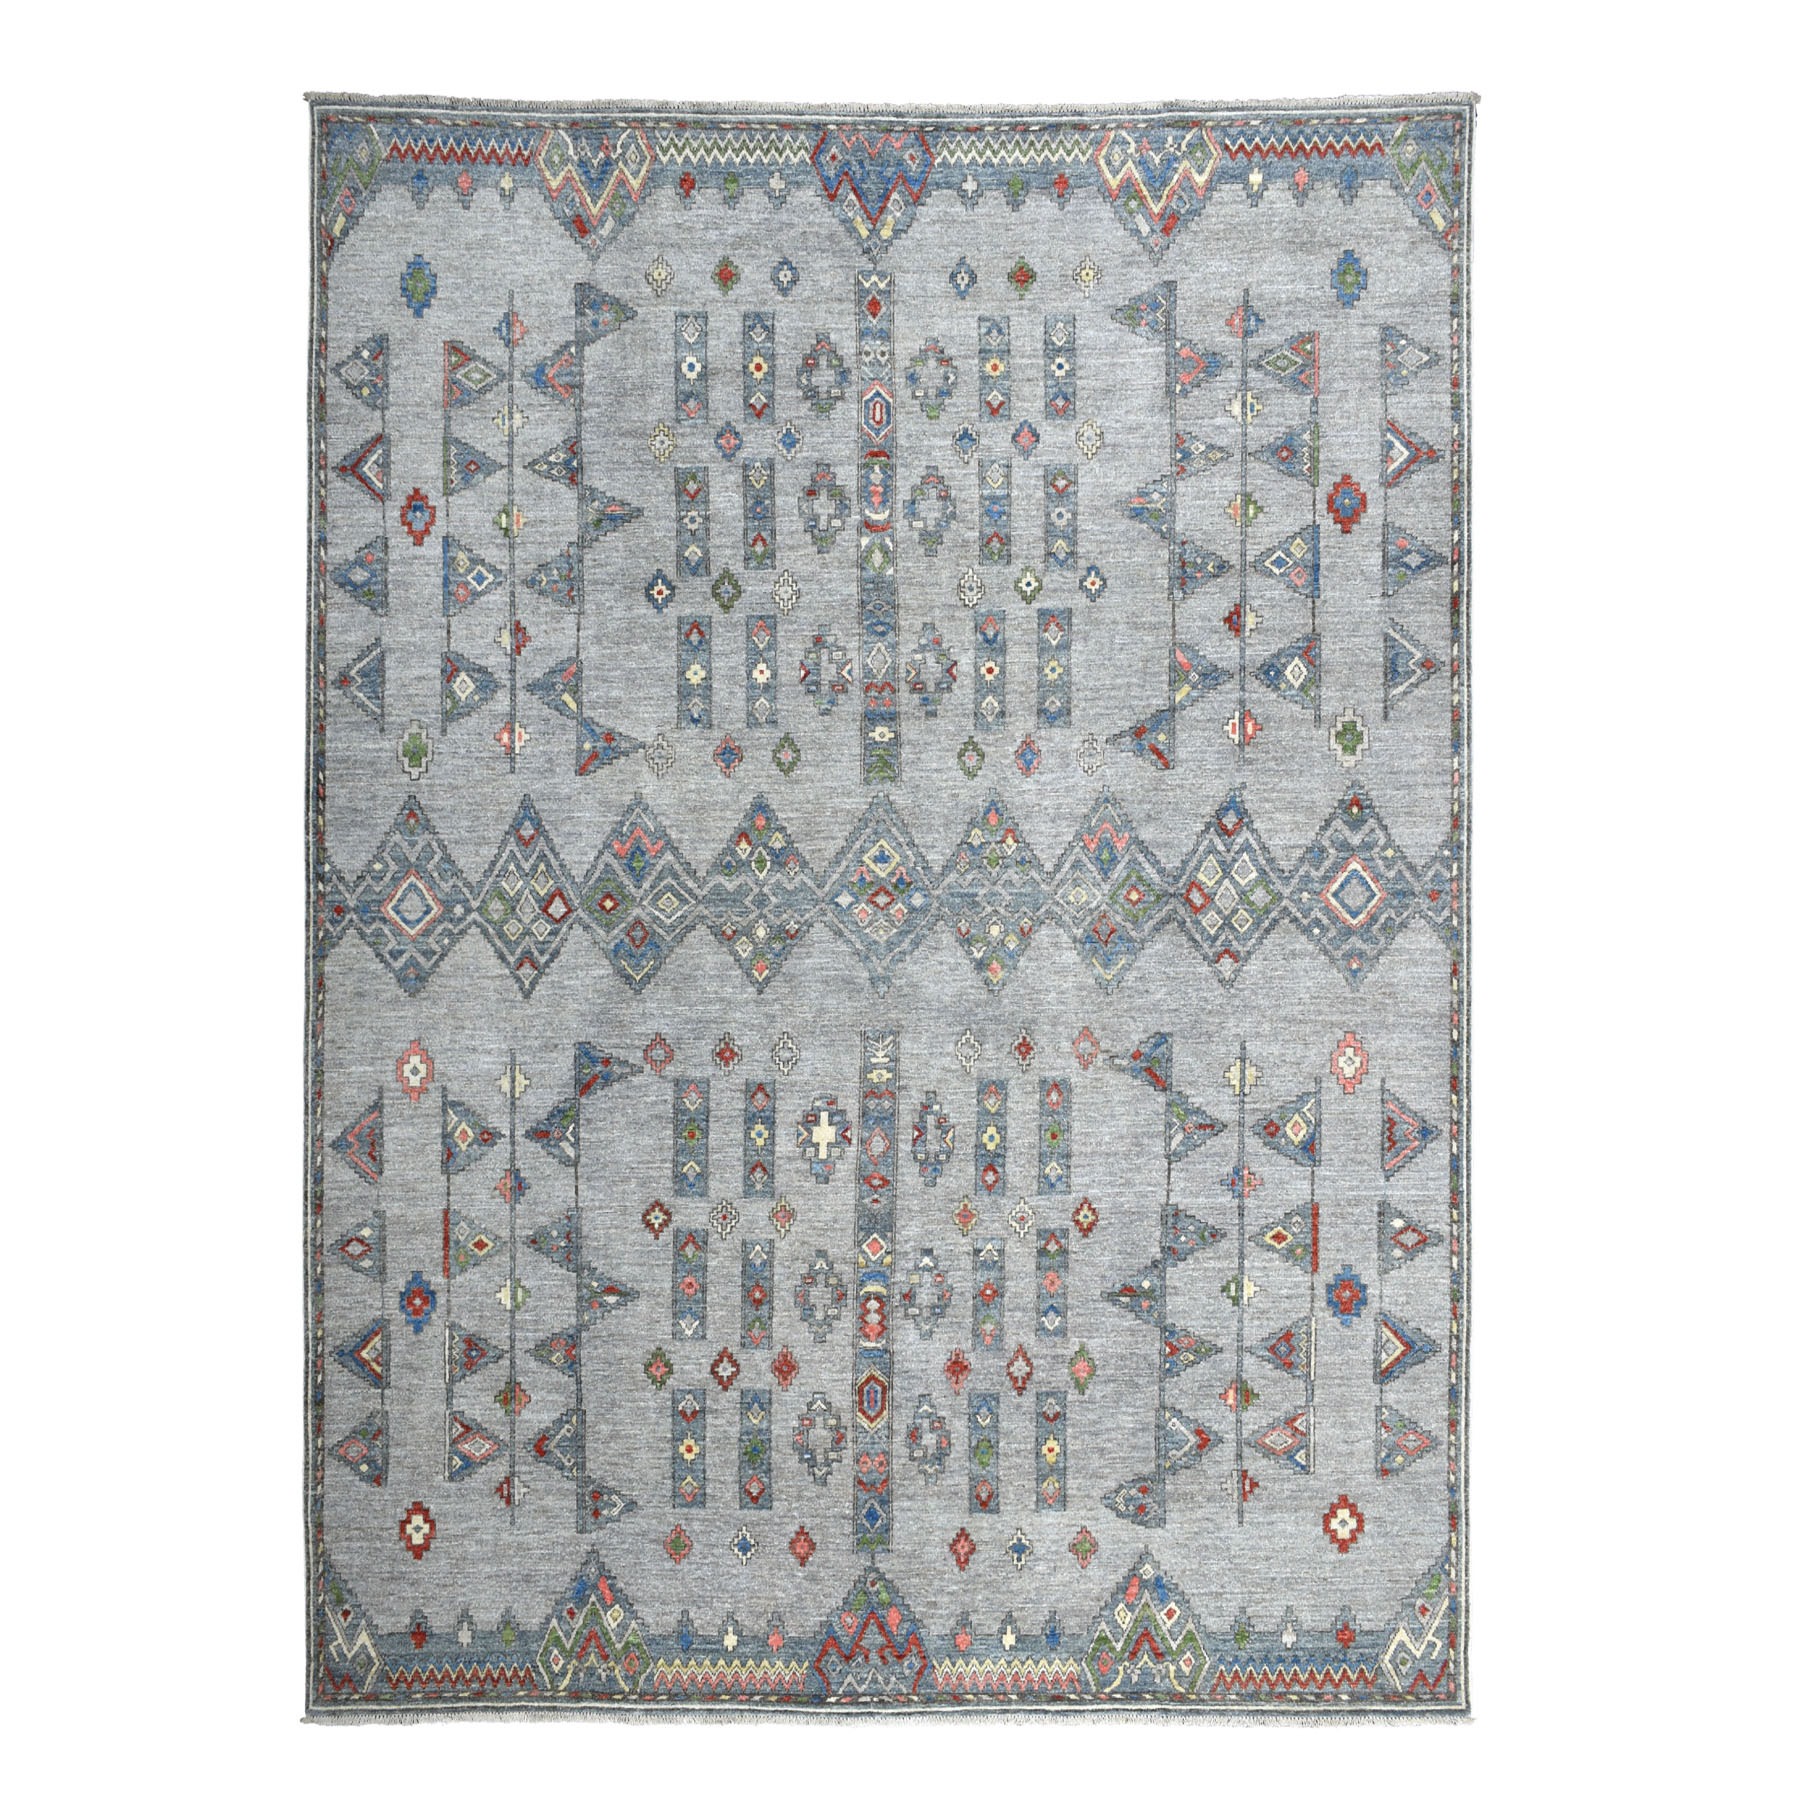 9'X11'10" Peshawar With Berber Motifs Inspired  With Pop Of Color Pure Wool Oriental Rug moaedb09